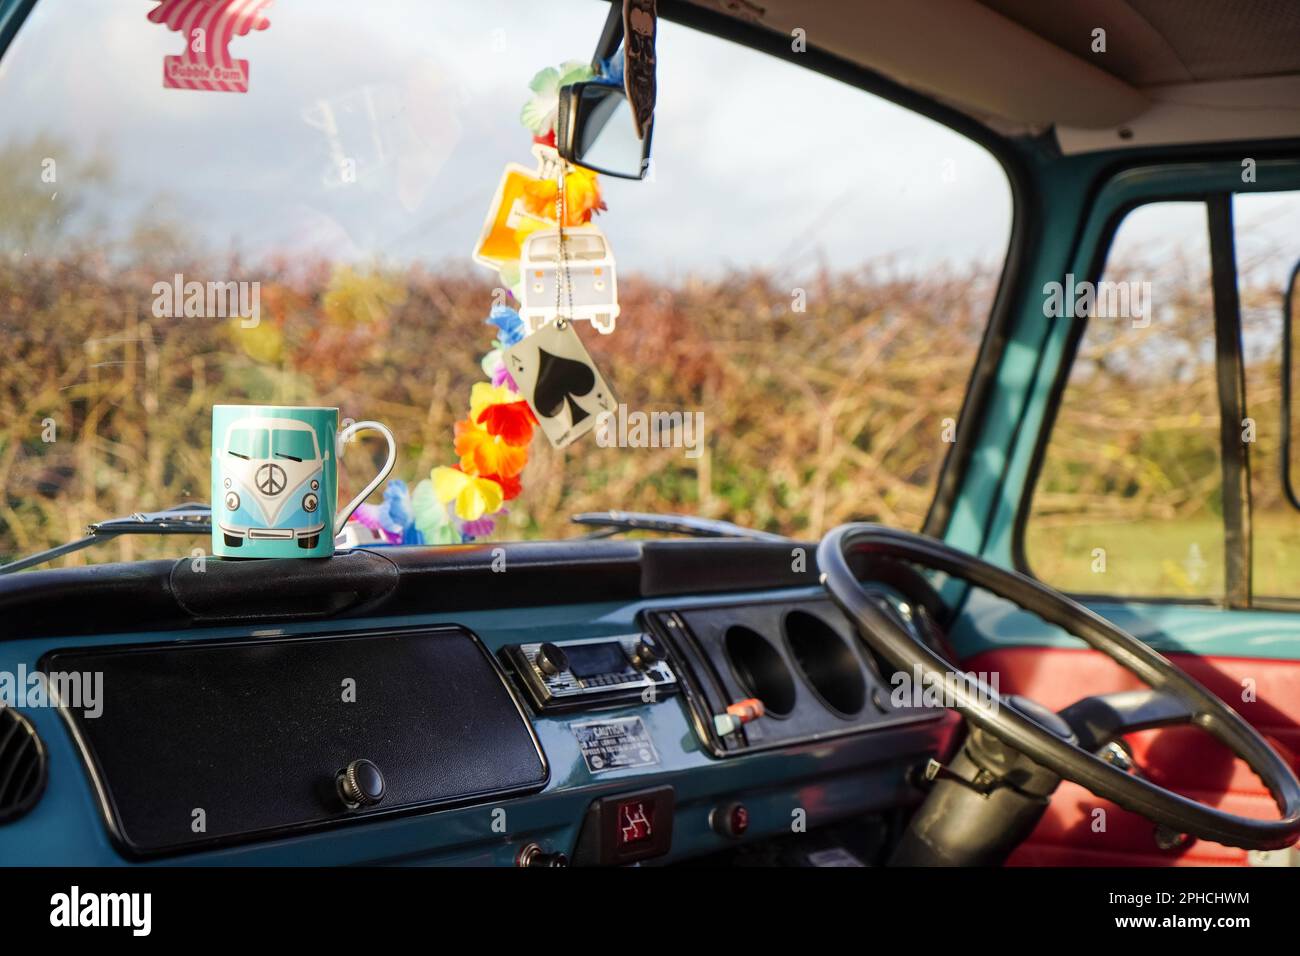 Looking out over the dashboard and steering wheel of a 'Bay Window' VW camper van, with a coffee mug and garland of brightly coloured flowers hanging Stock Photo